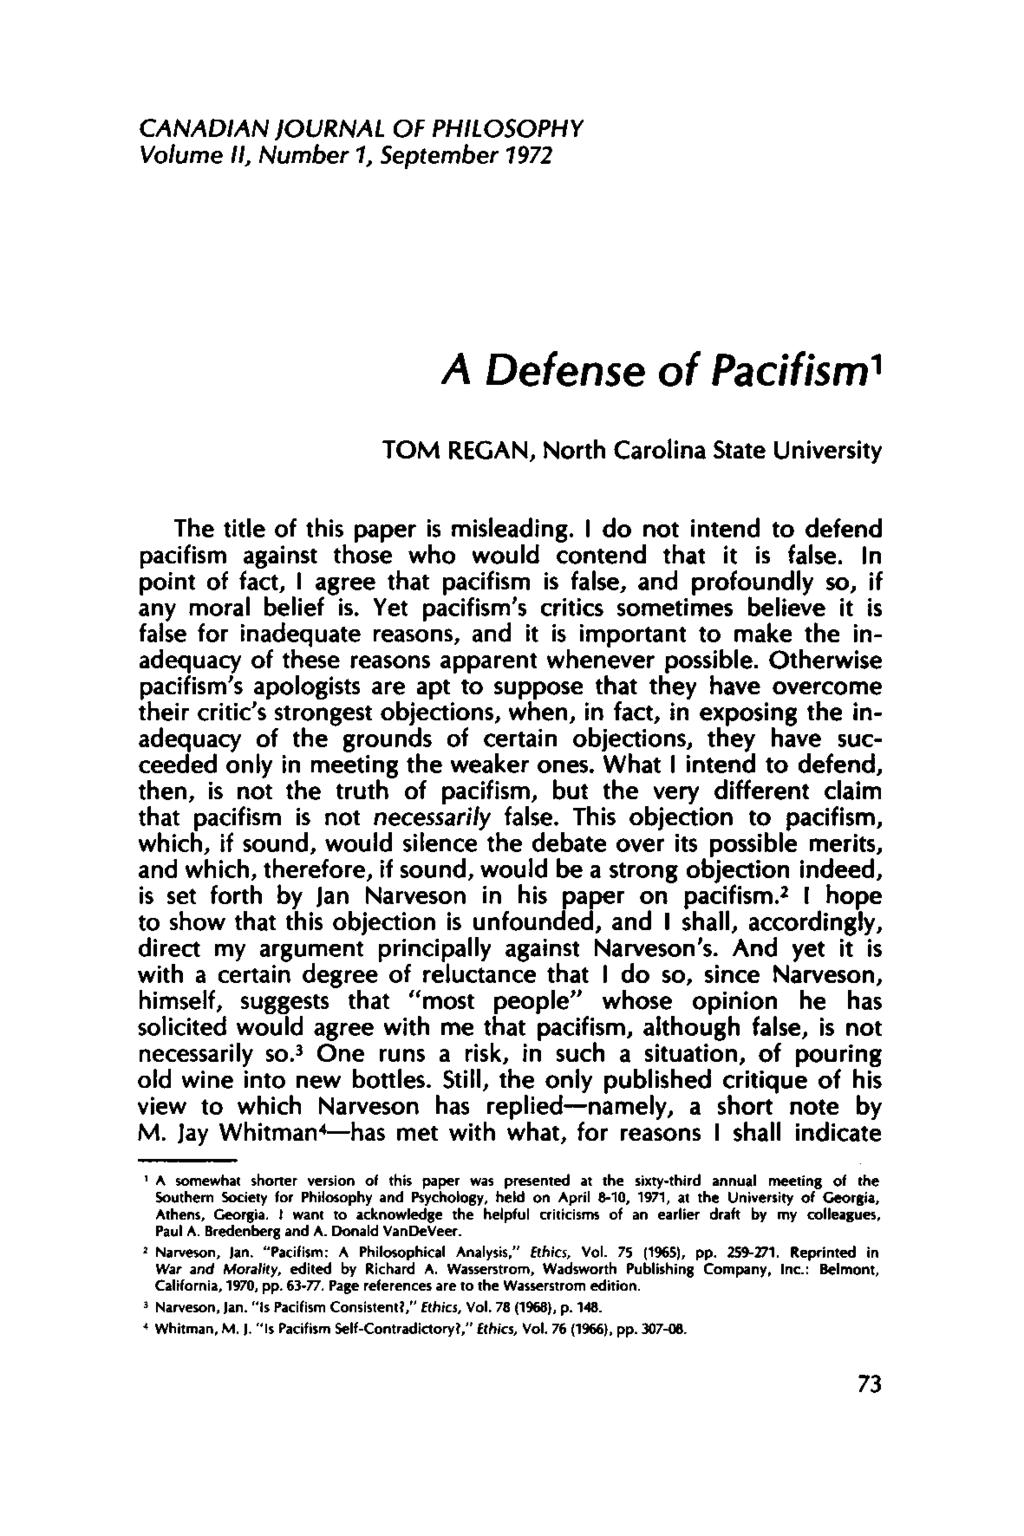 CANADIAN JOURNAL OF PHILOSOPHY Volume II, Number 1, September 1972 A Defense of Pacifism1 TO M REGAN, North Carolina State University The title of this paper is misleading.